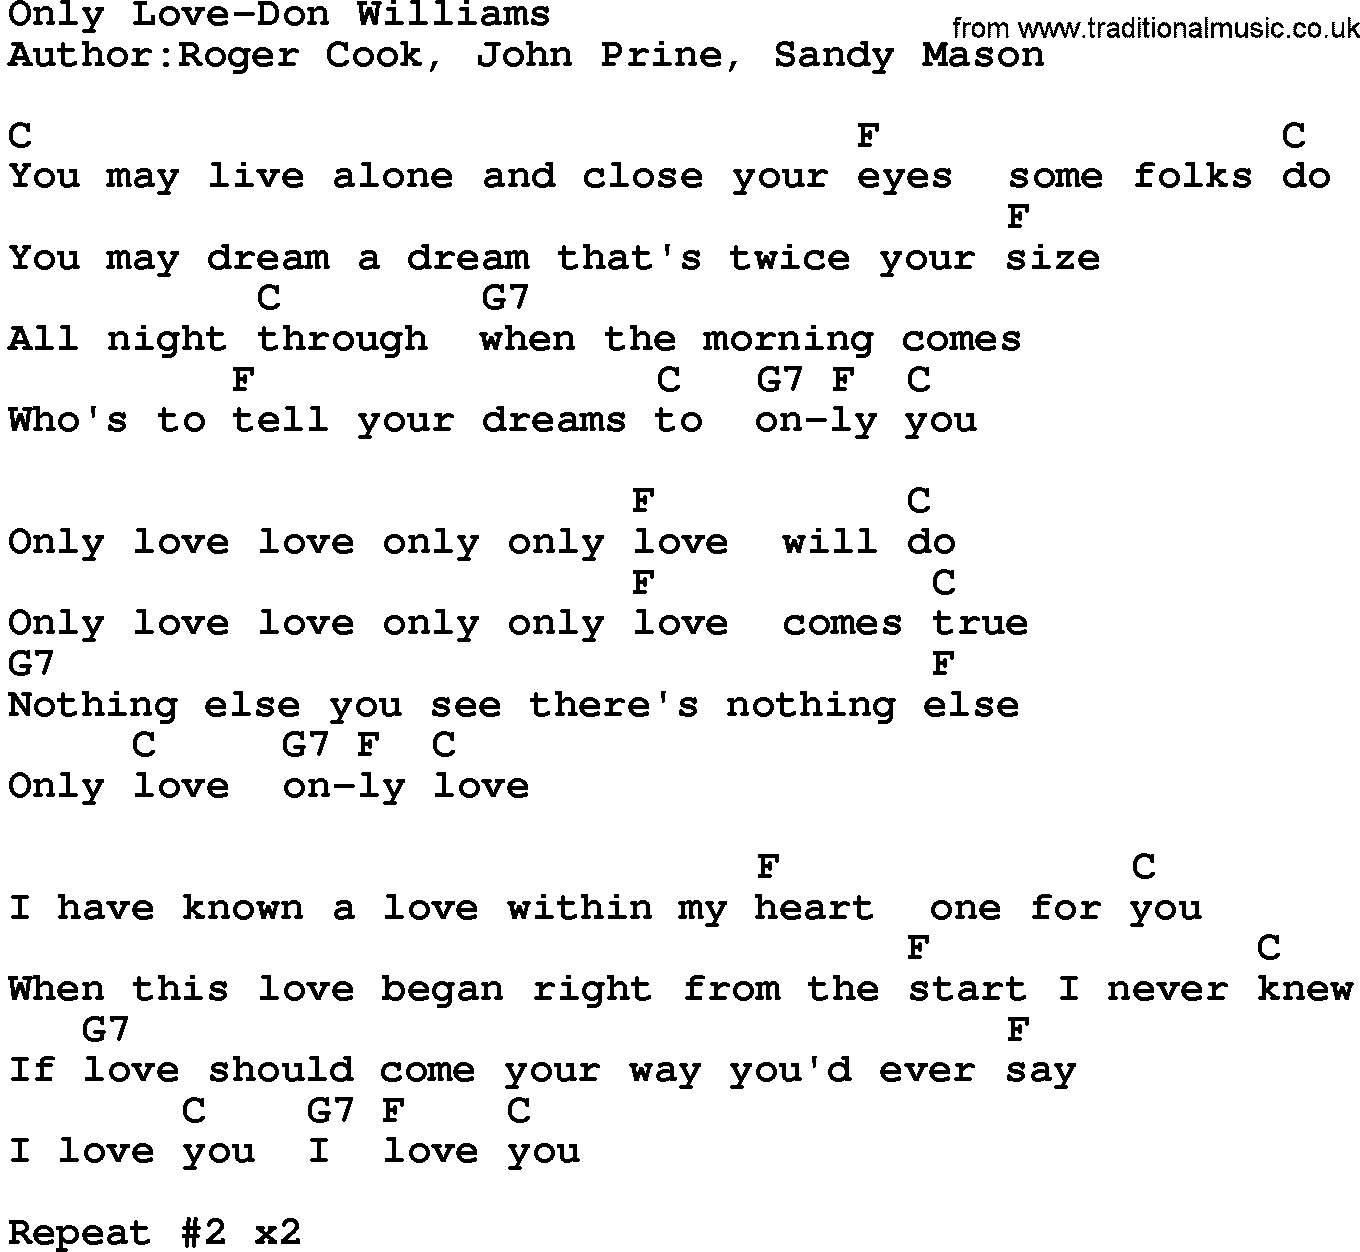 Country music song: Only Love-Don Williams lyrics and chords